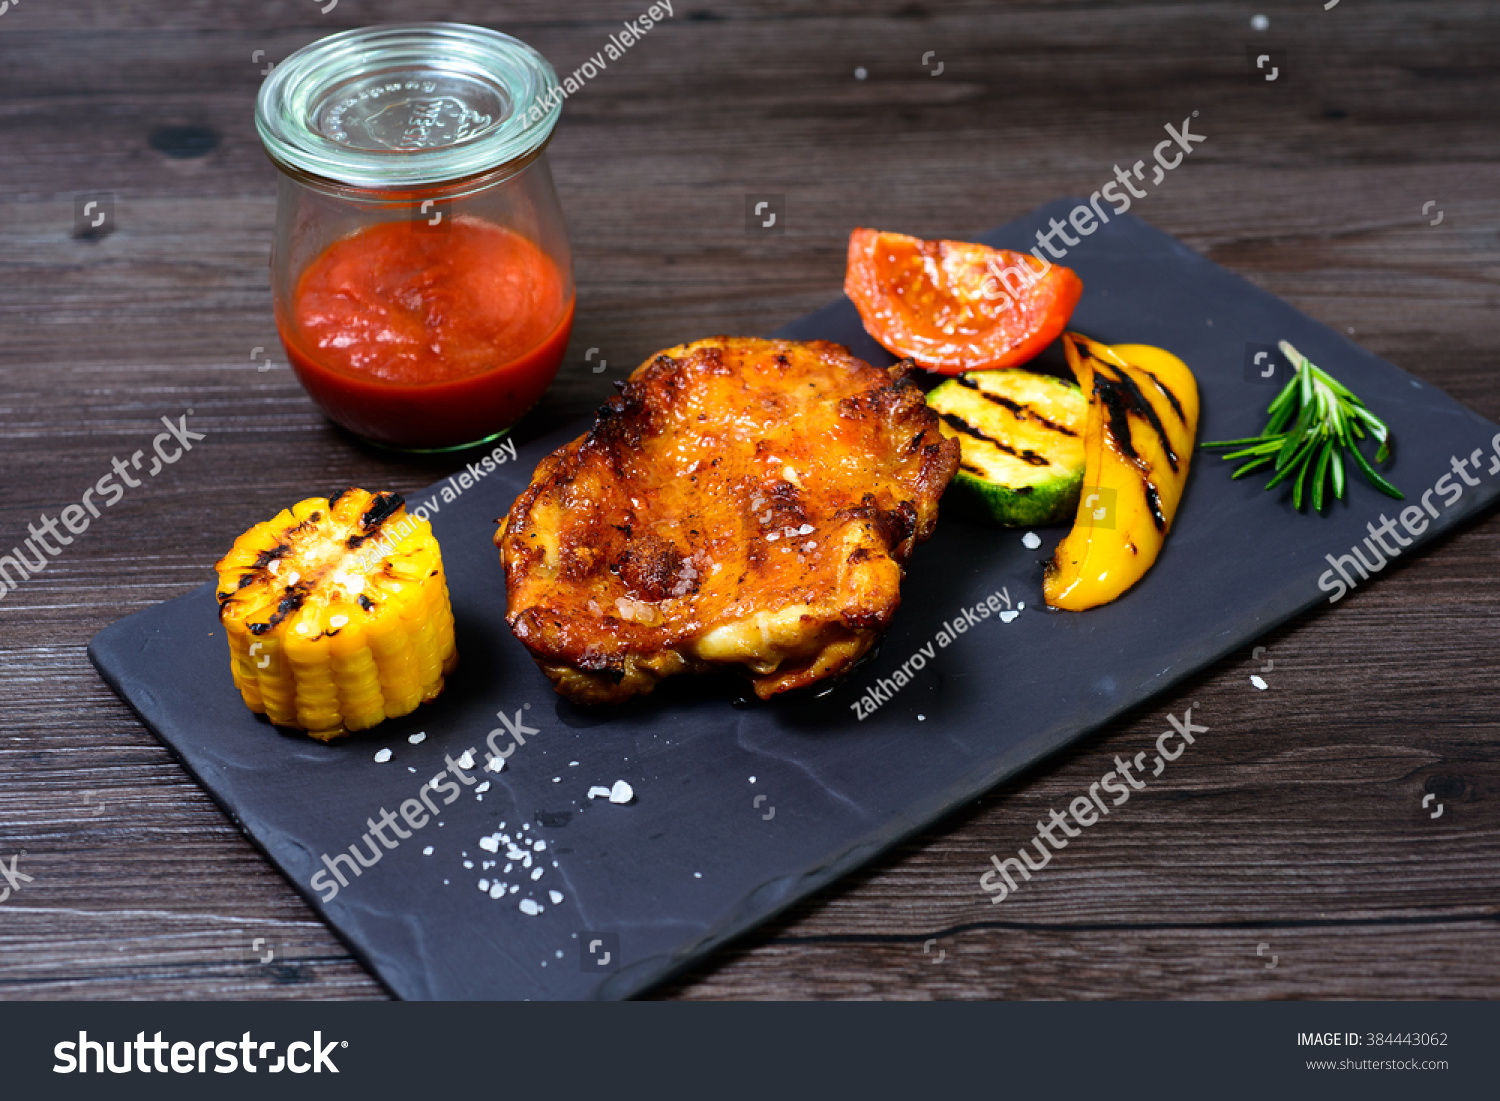 juicy grilled chicken with vegetables on a basalt slab #384443062